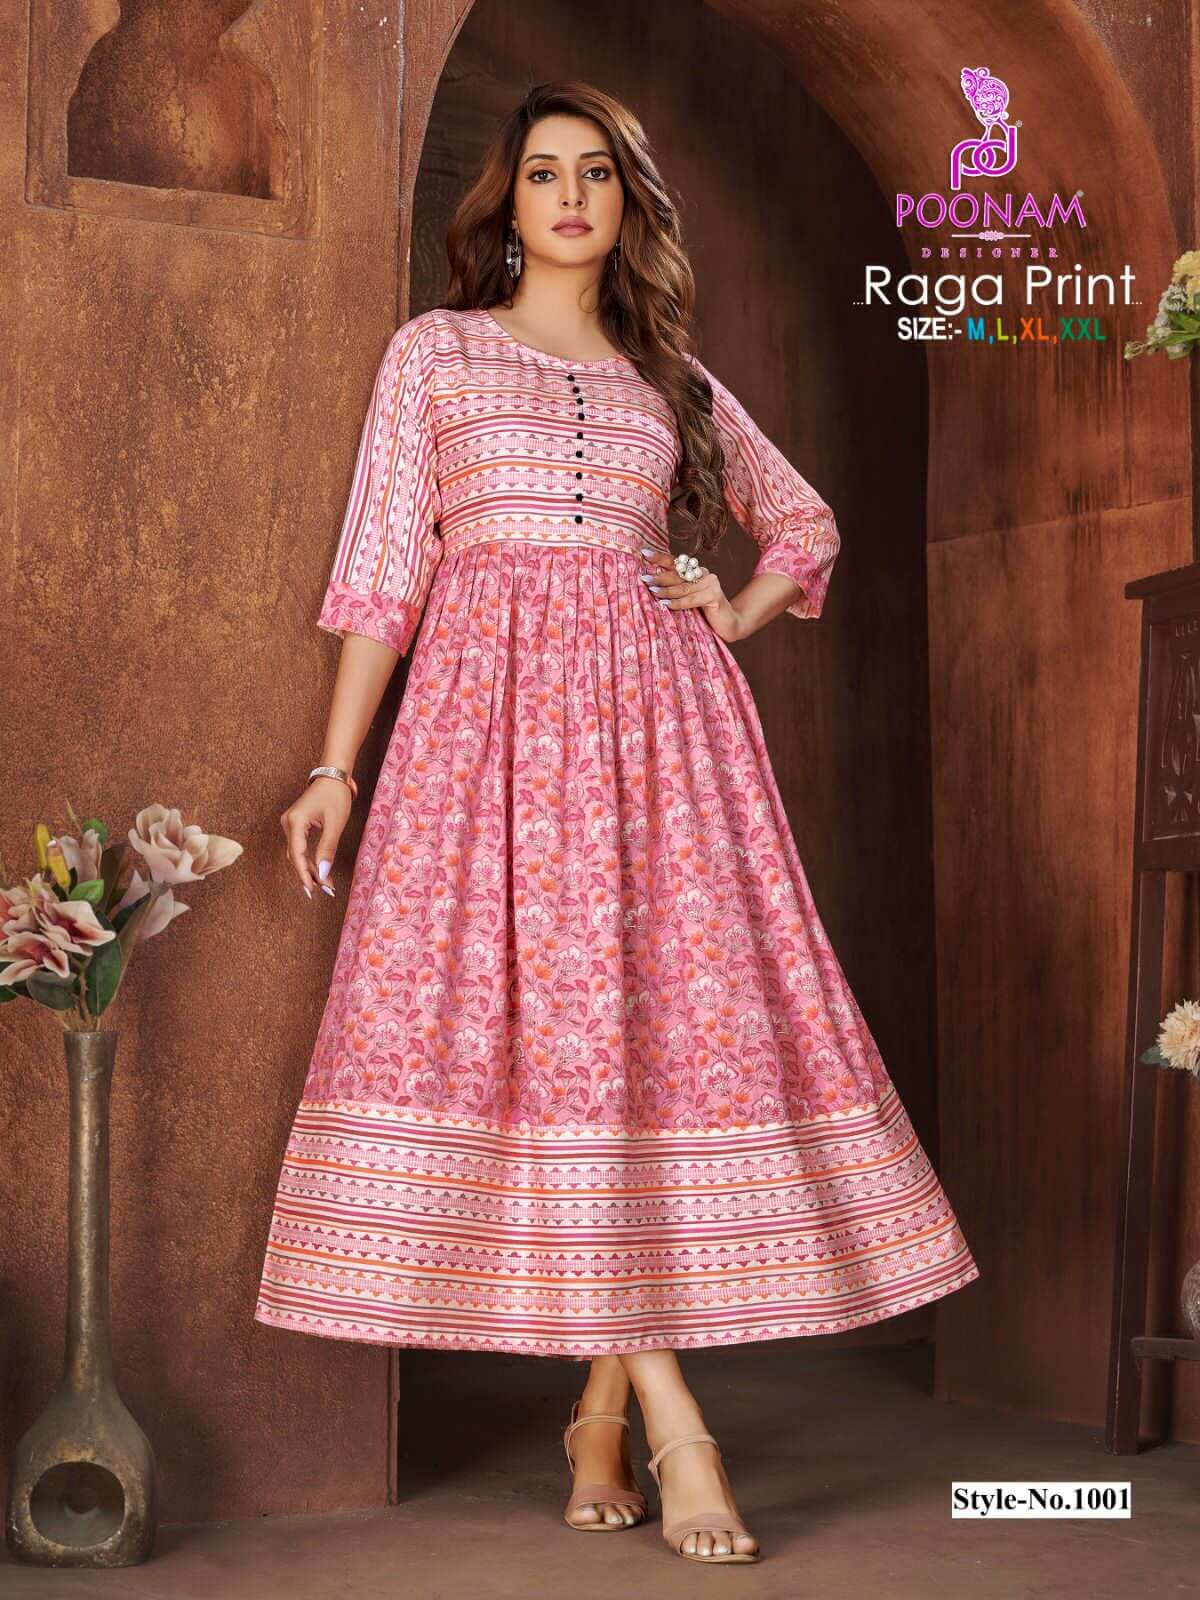 Poonam Raga Print Gowns Catalog collection 2